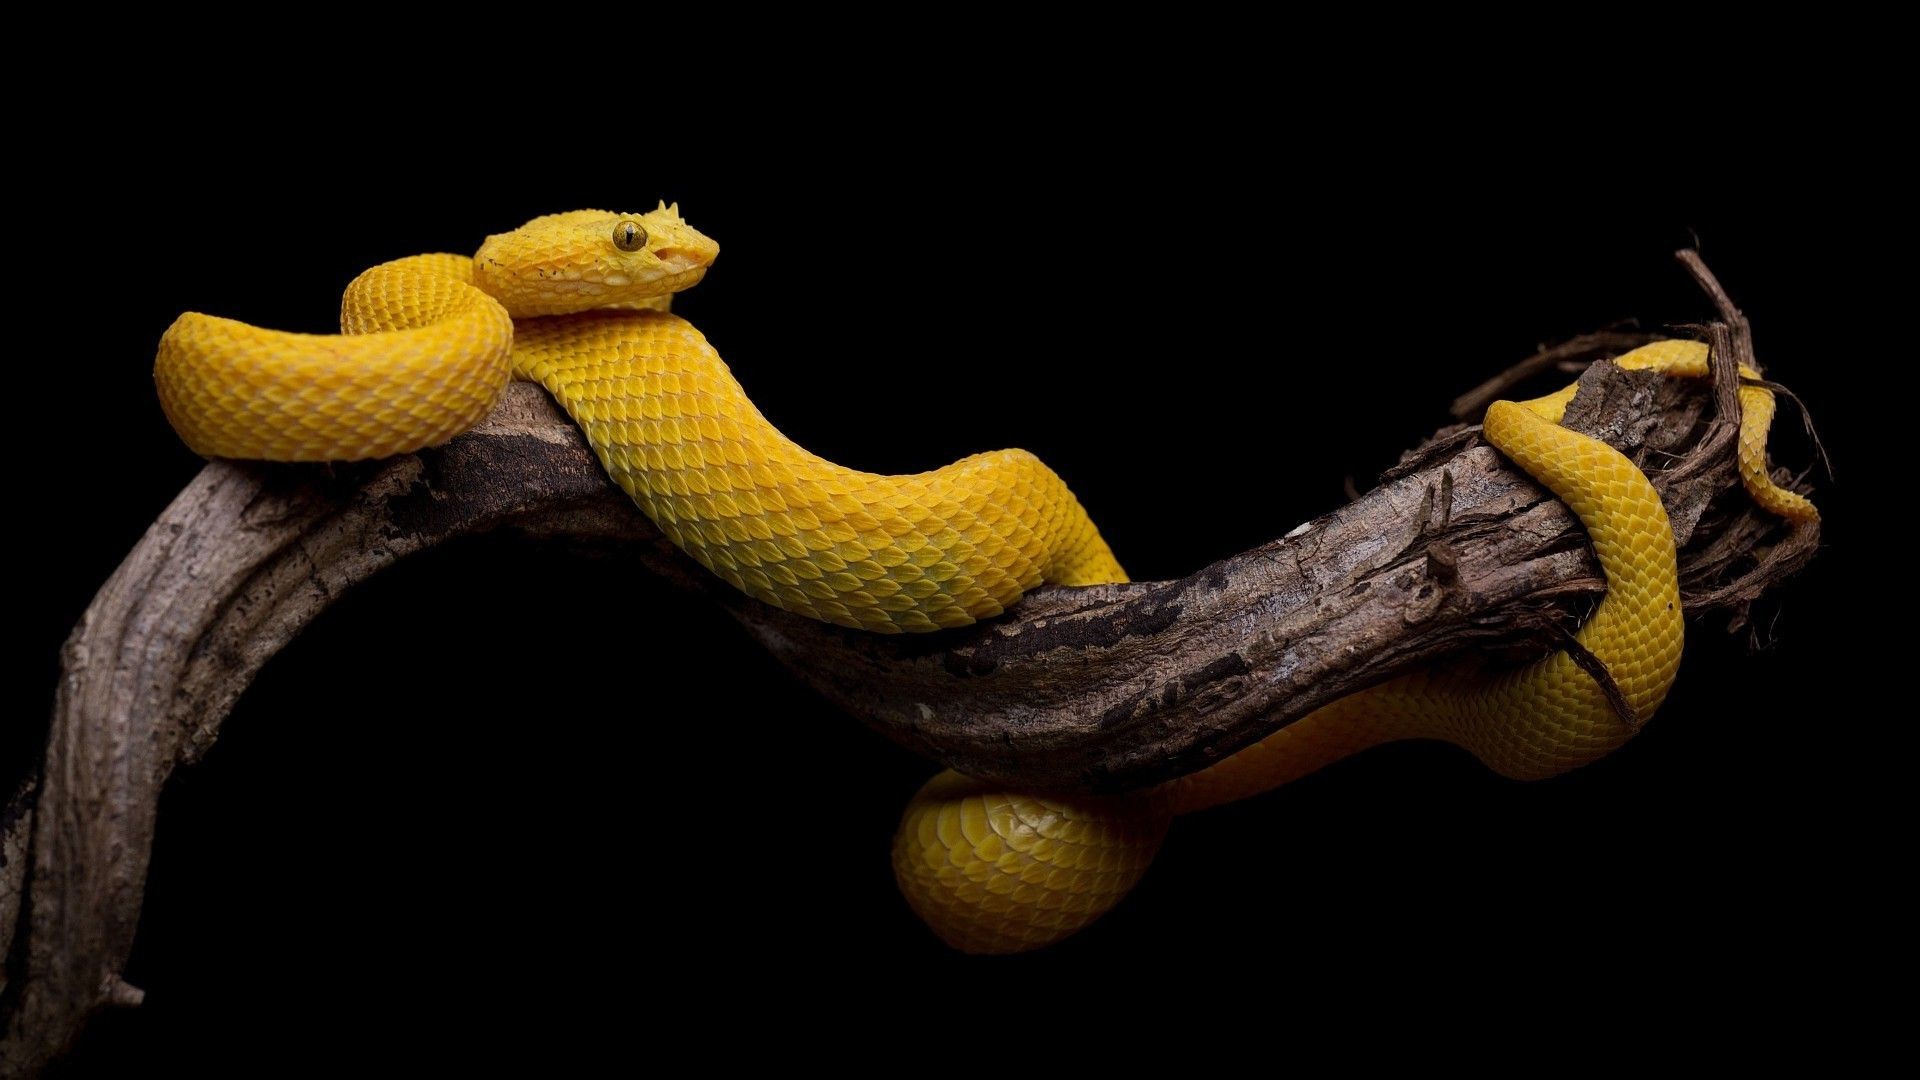 1920x1080 Download hd wallpapers of 332161-black Background, Simple, Snake, Animals,  Reptile, Yellow, Branch. Free download High Quality and Widescreen  Resolutions D